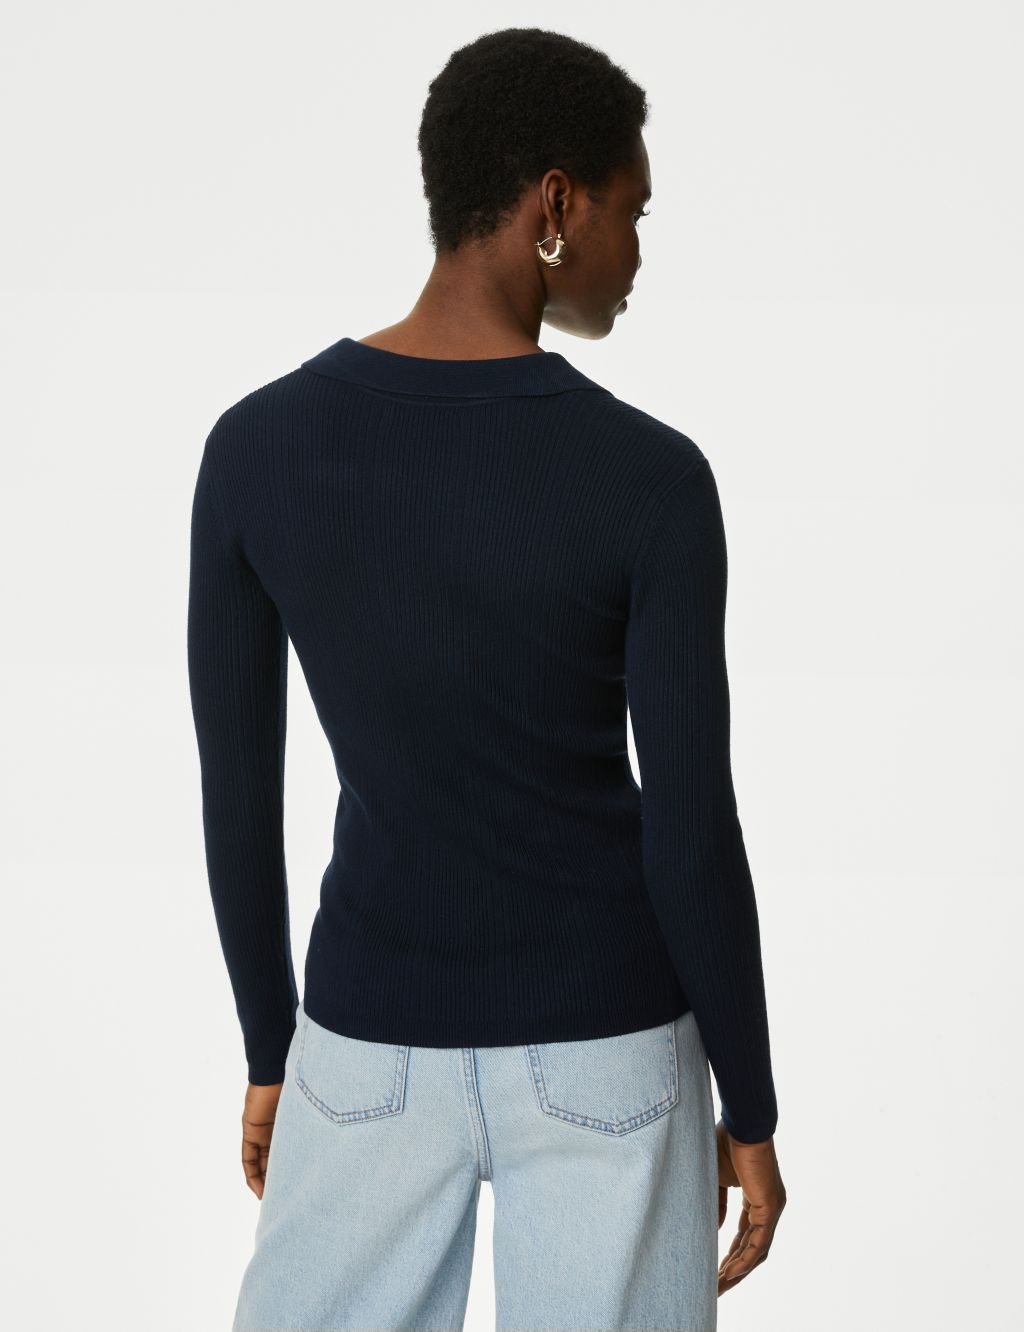 Ribbed Collared Fitted Knitted Top image 5